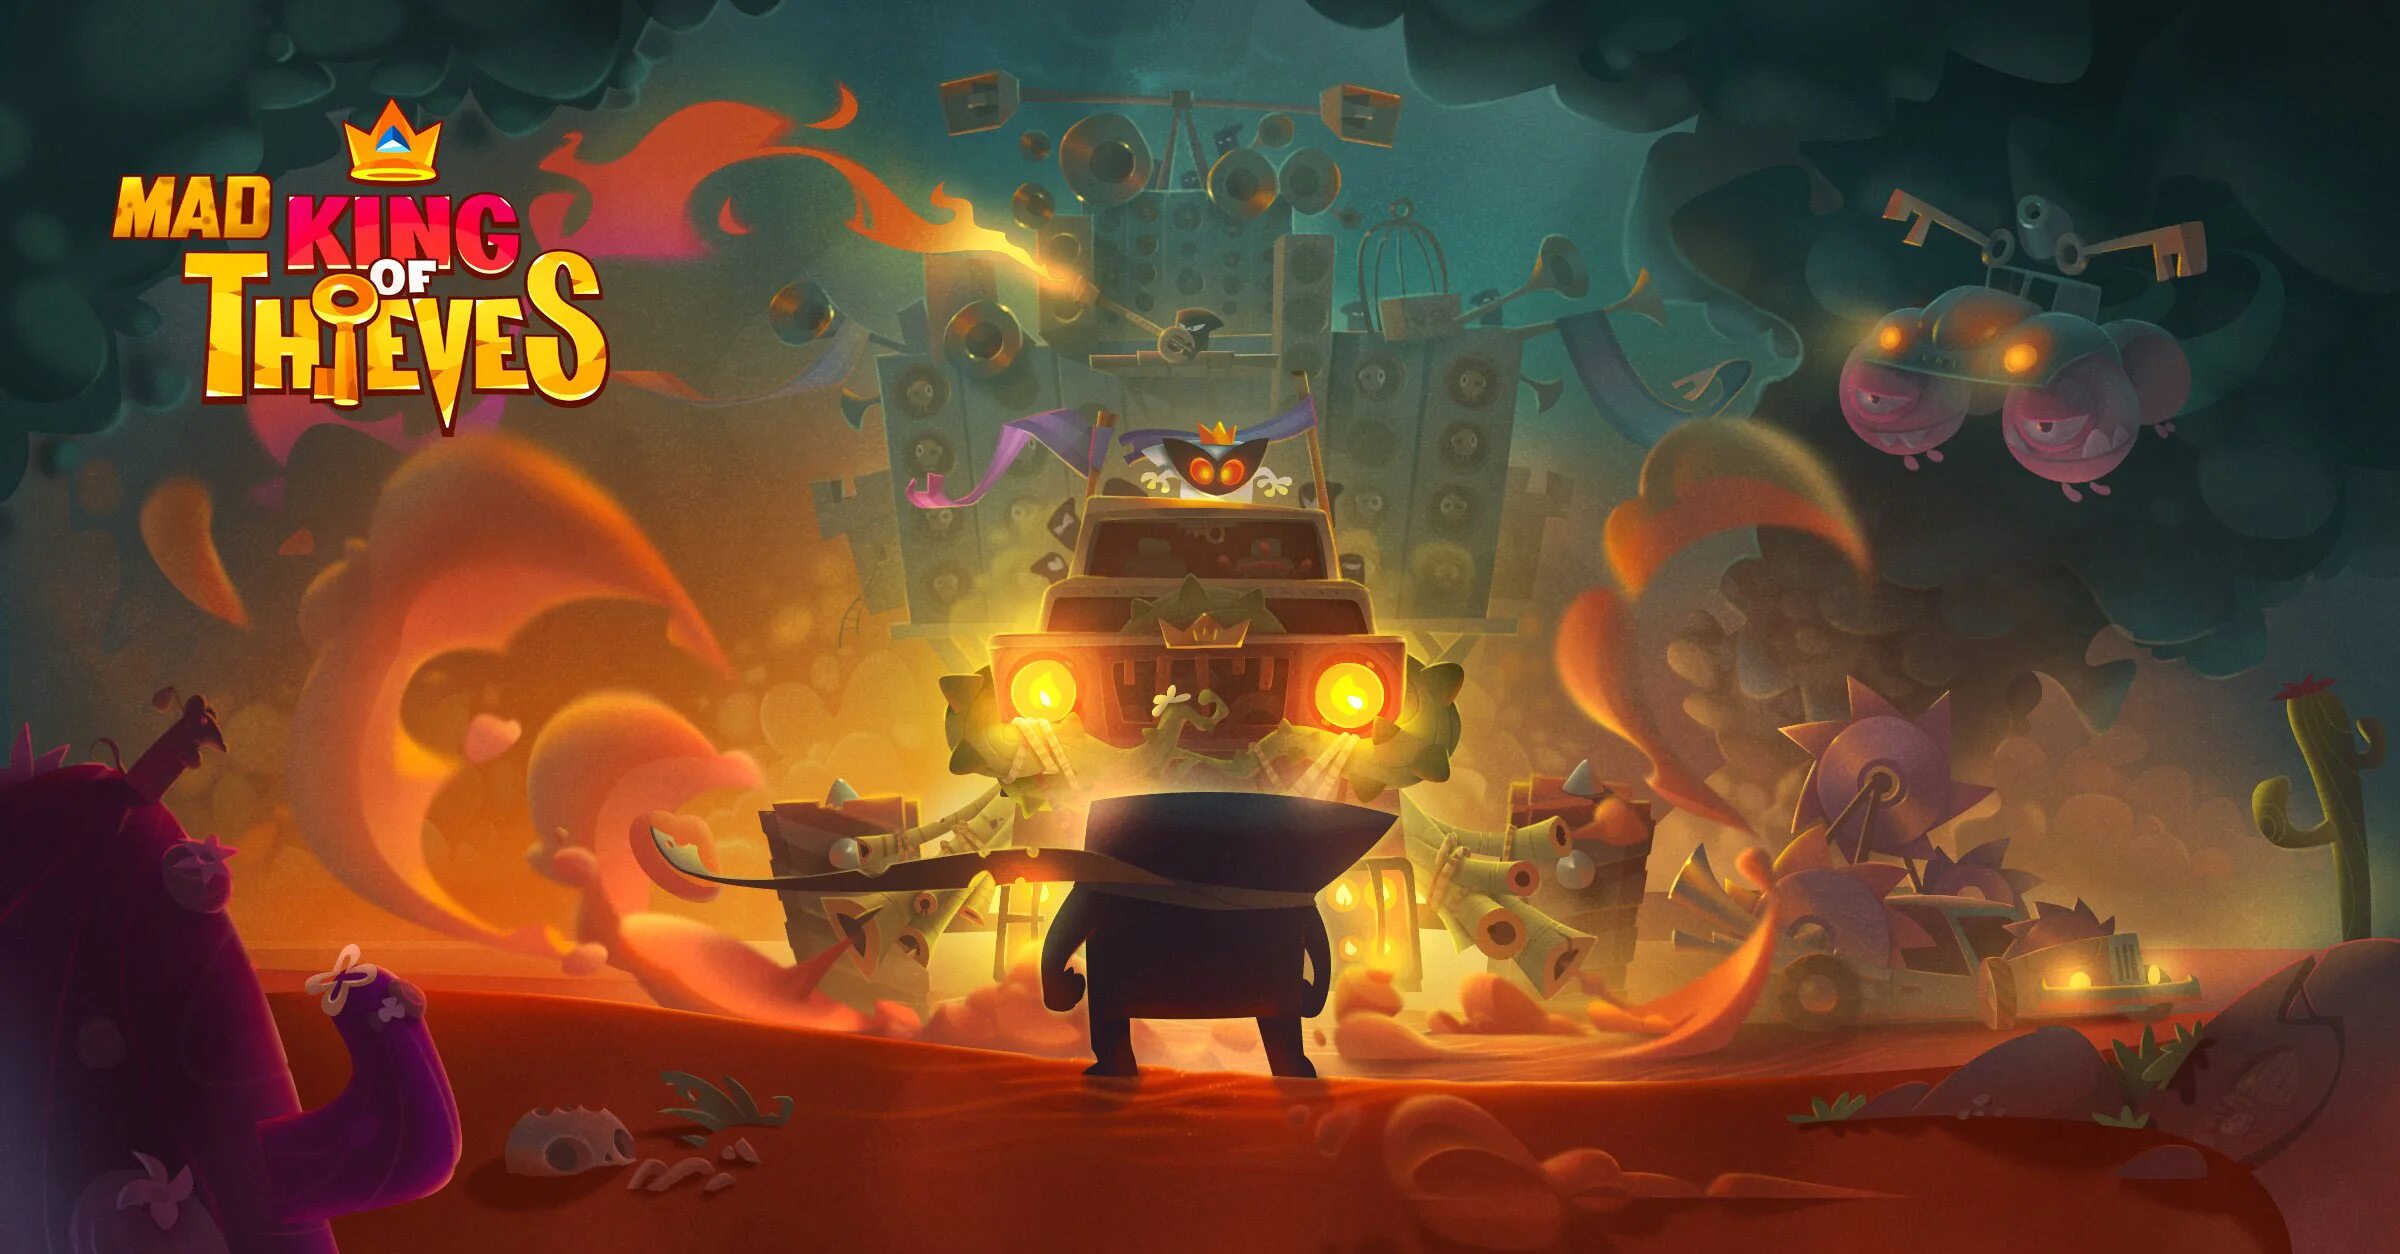 Игра king of thieves. King of Thieves игра Джо. King of Thieves Король. King of Thieves арты. Король воров арт.